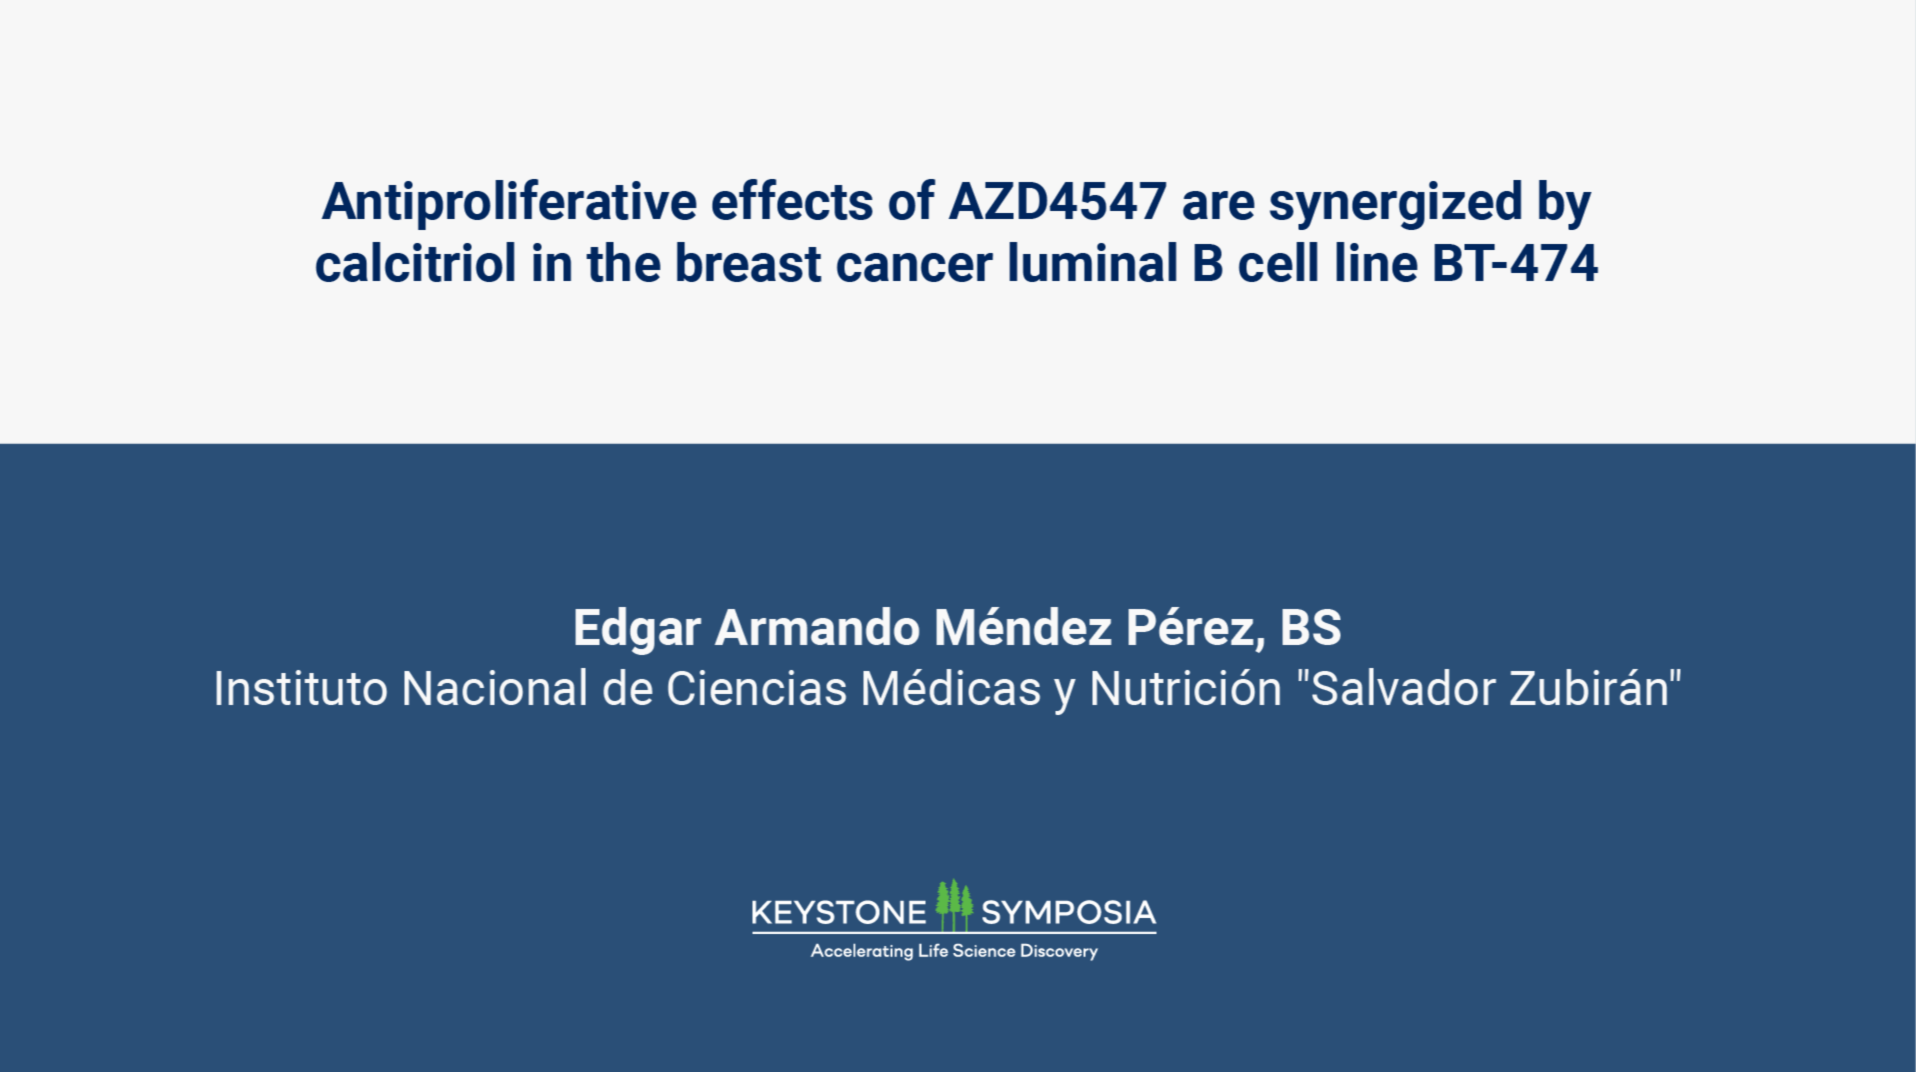 Antiproliferative effects of AZD4547 are synergized by calcitriol in the breast cancer luminal B cell line BT-474. icon